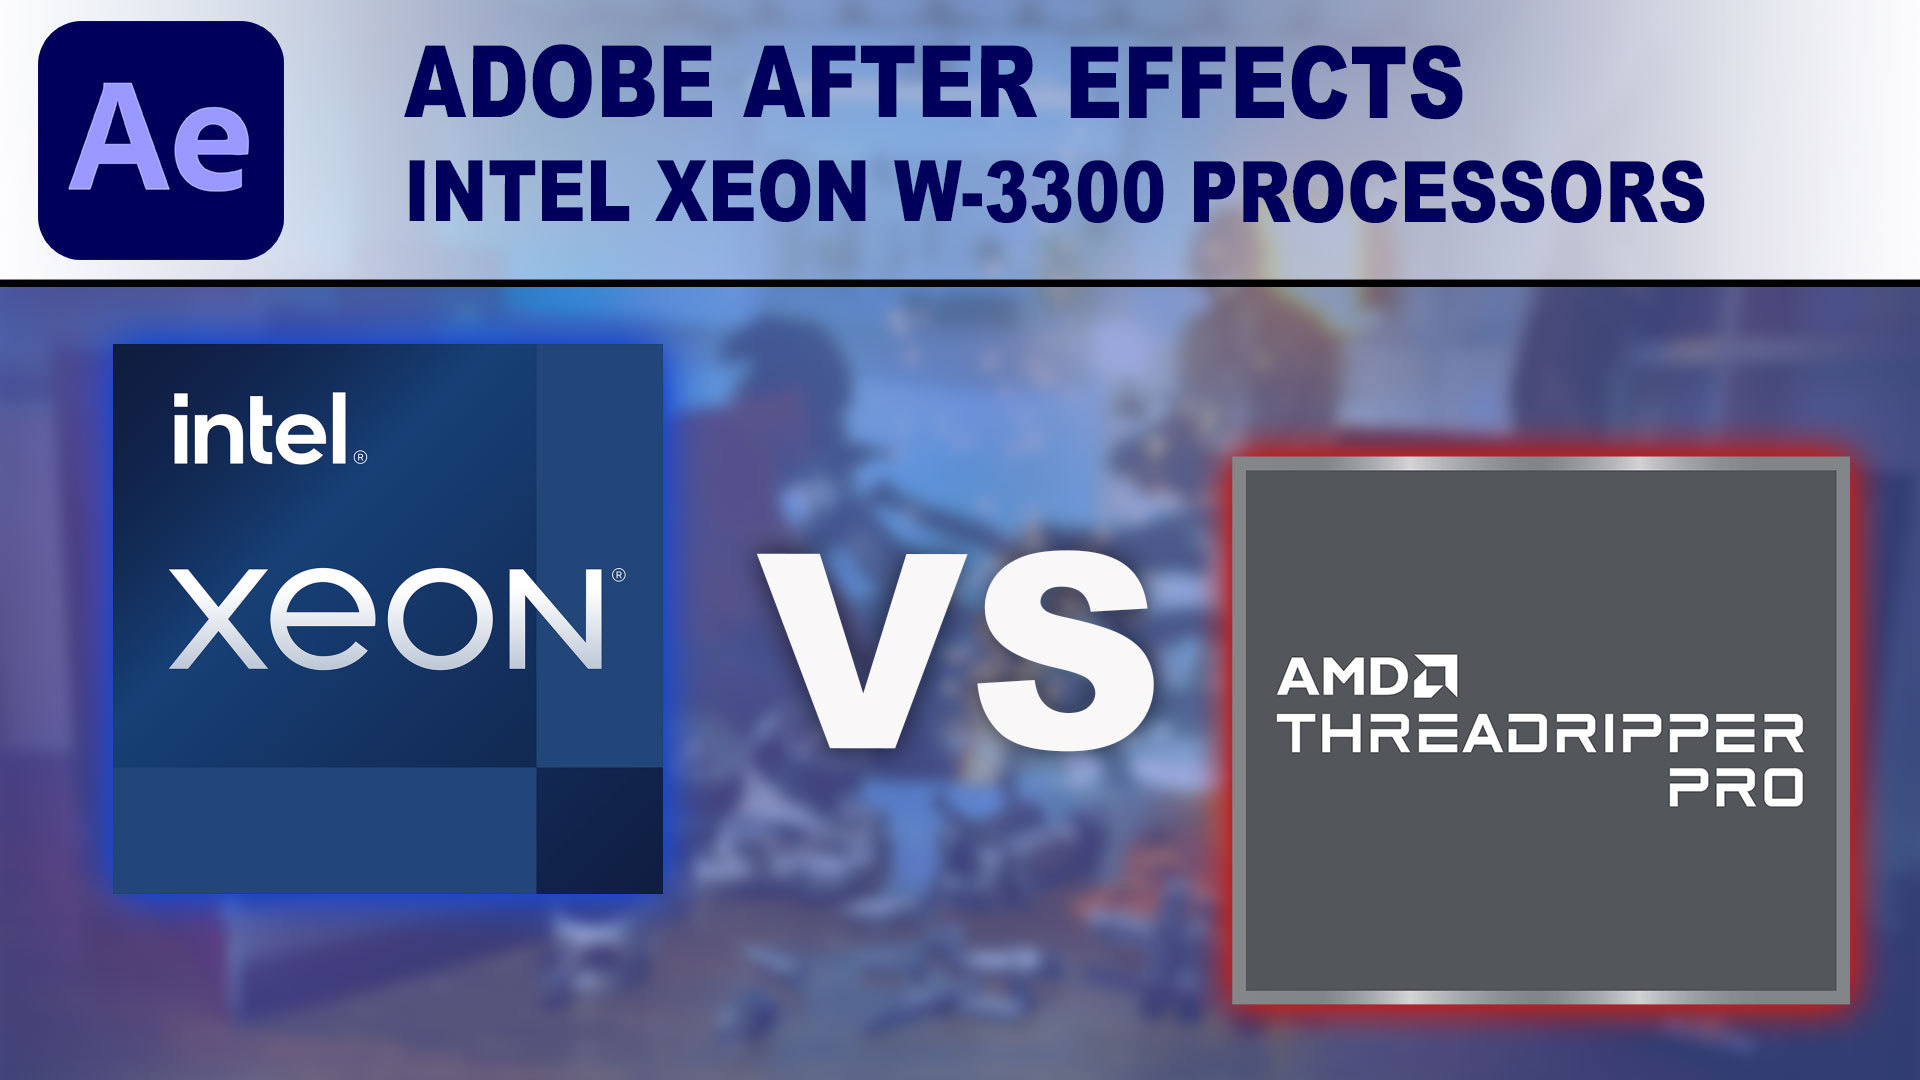 Intel Xeon W-3300 Processors for After Effects